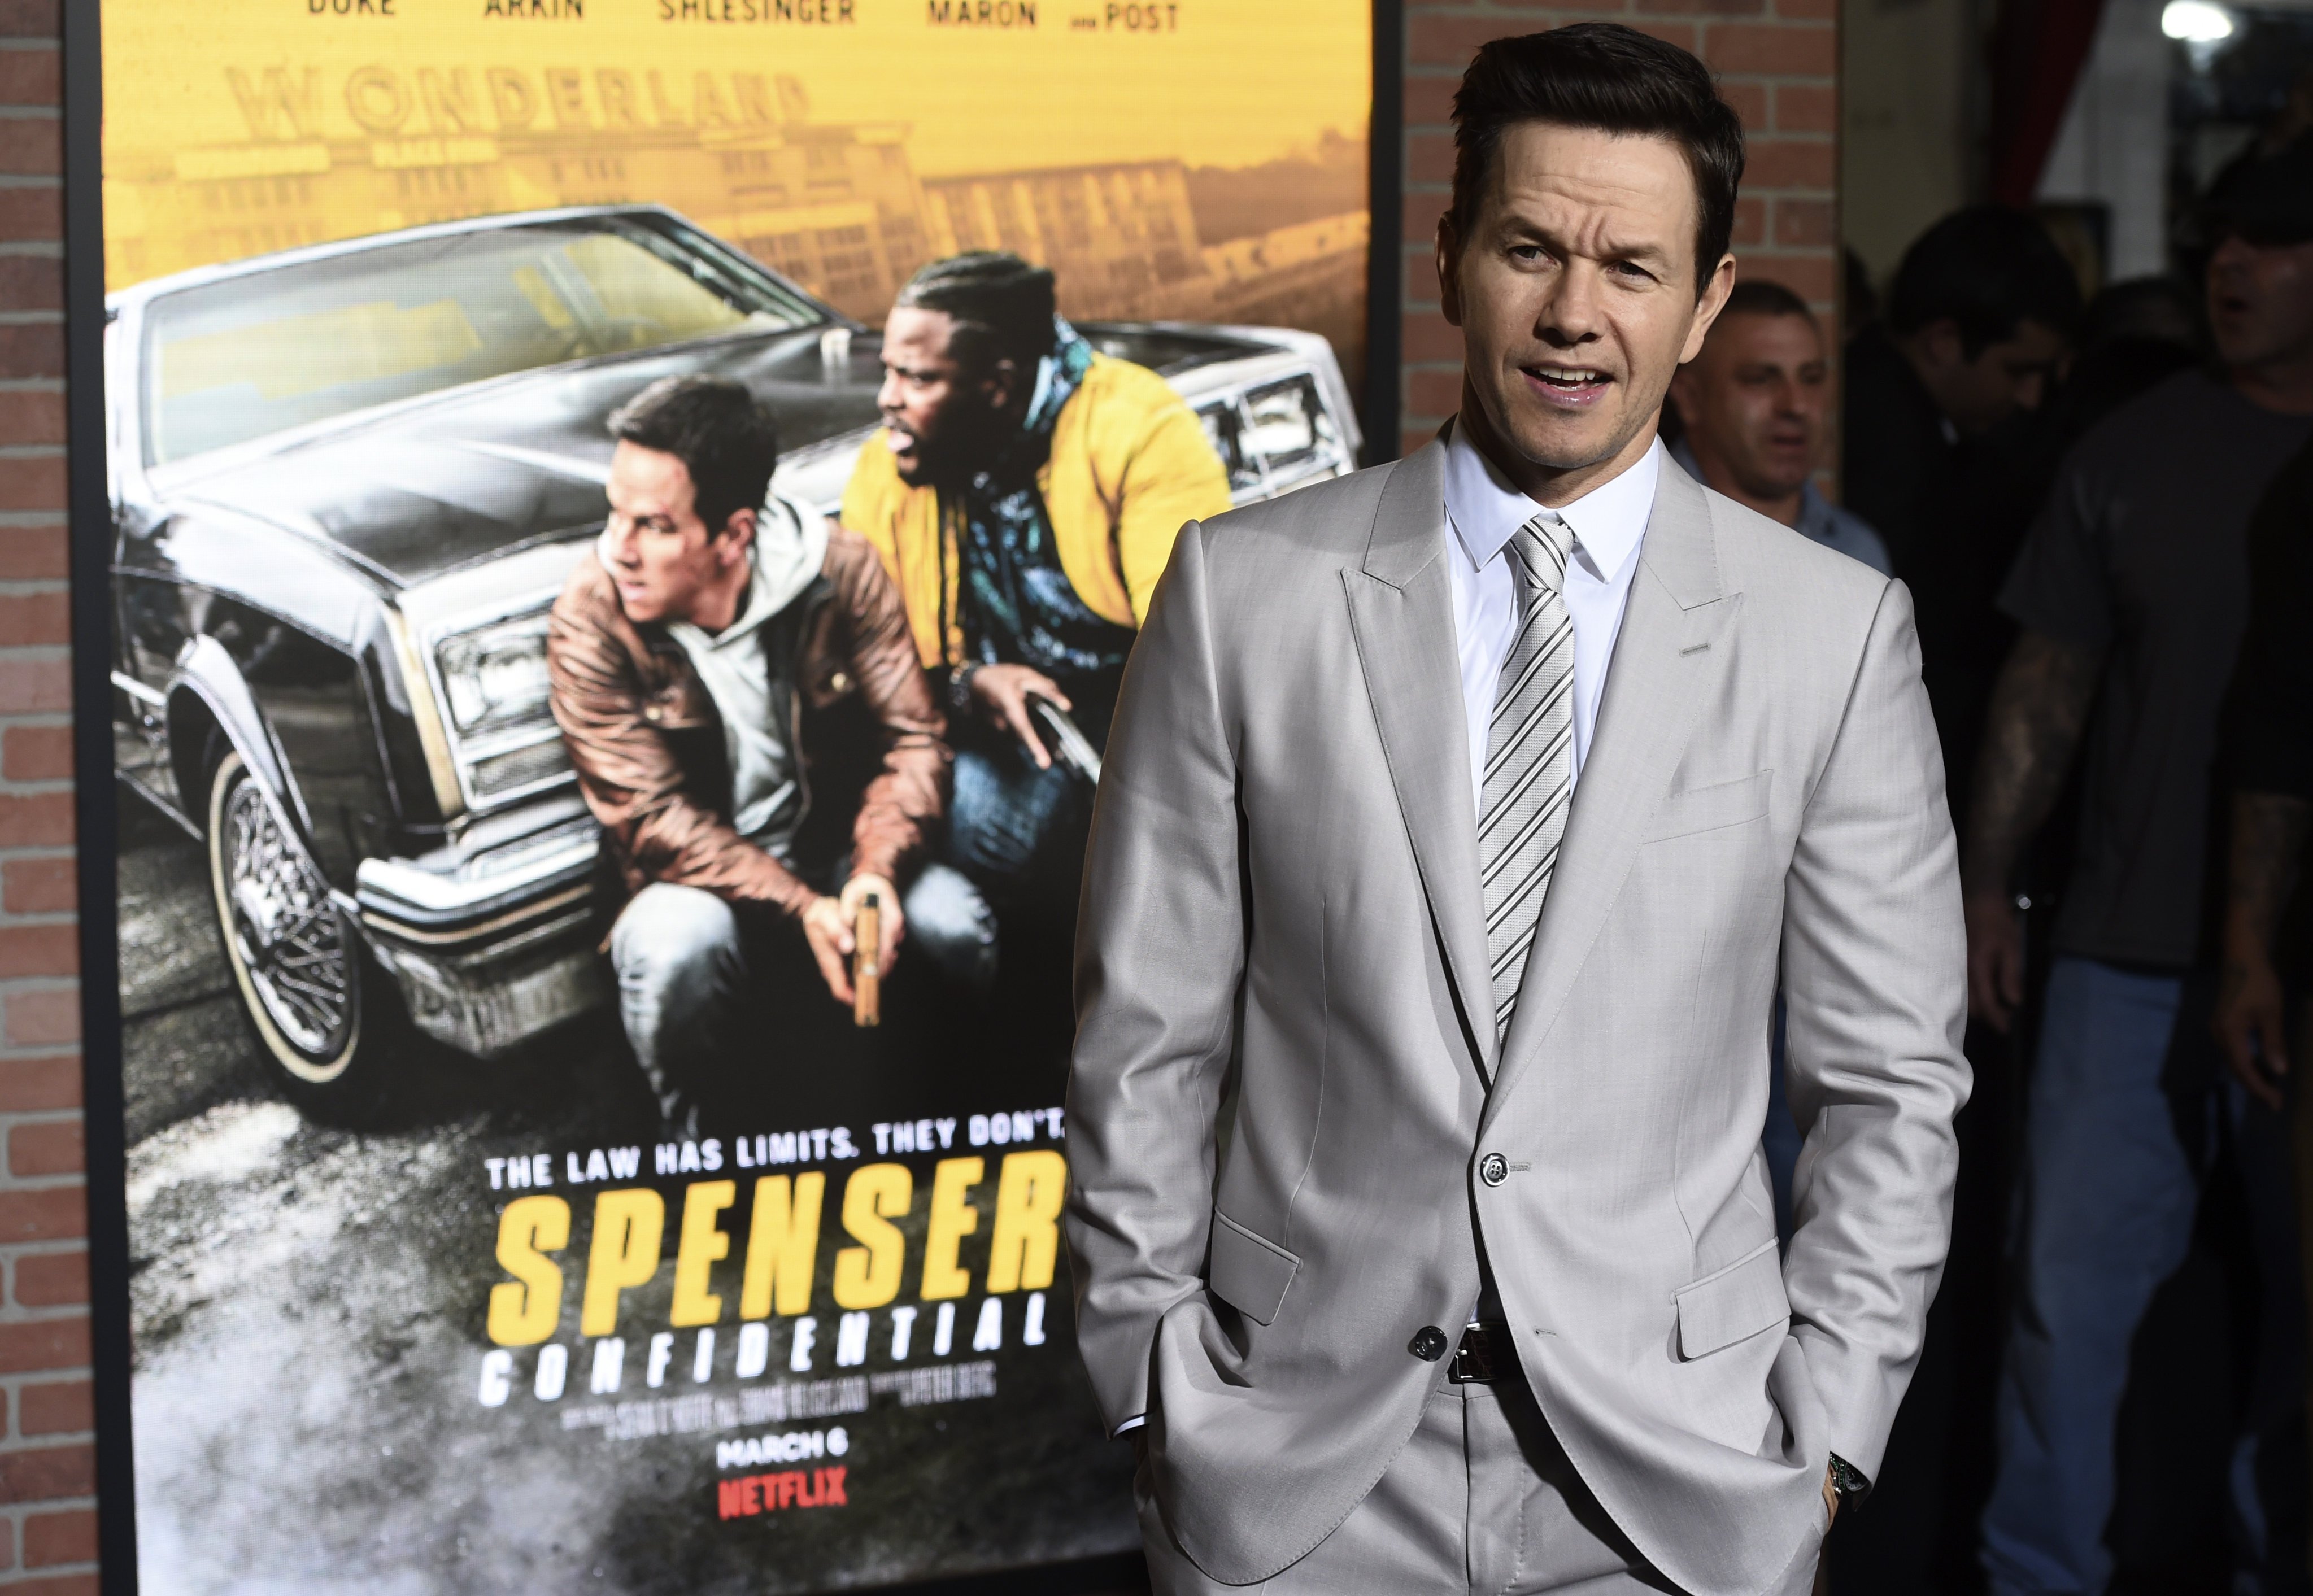 Mark Wahlberg, star of the Netflix film Spenser Confidential, poses at the premiere of the film at the Regency Village Theatre in February 2020, in Los Angeles. Photo: AP Photo